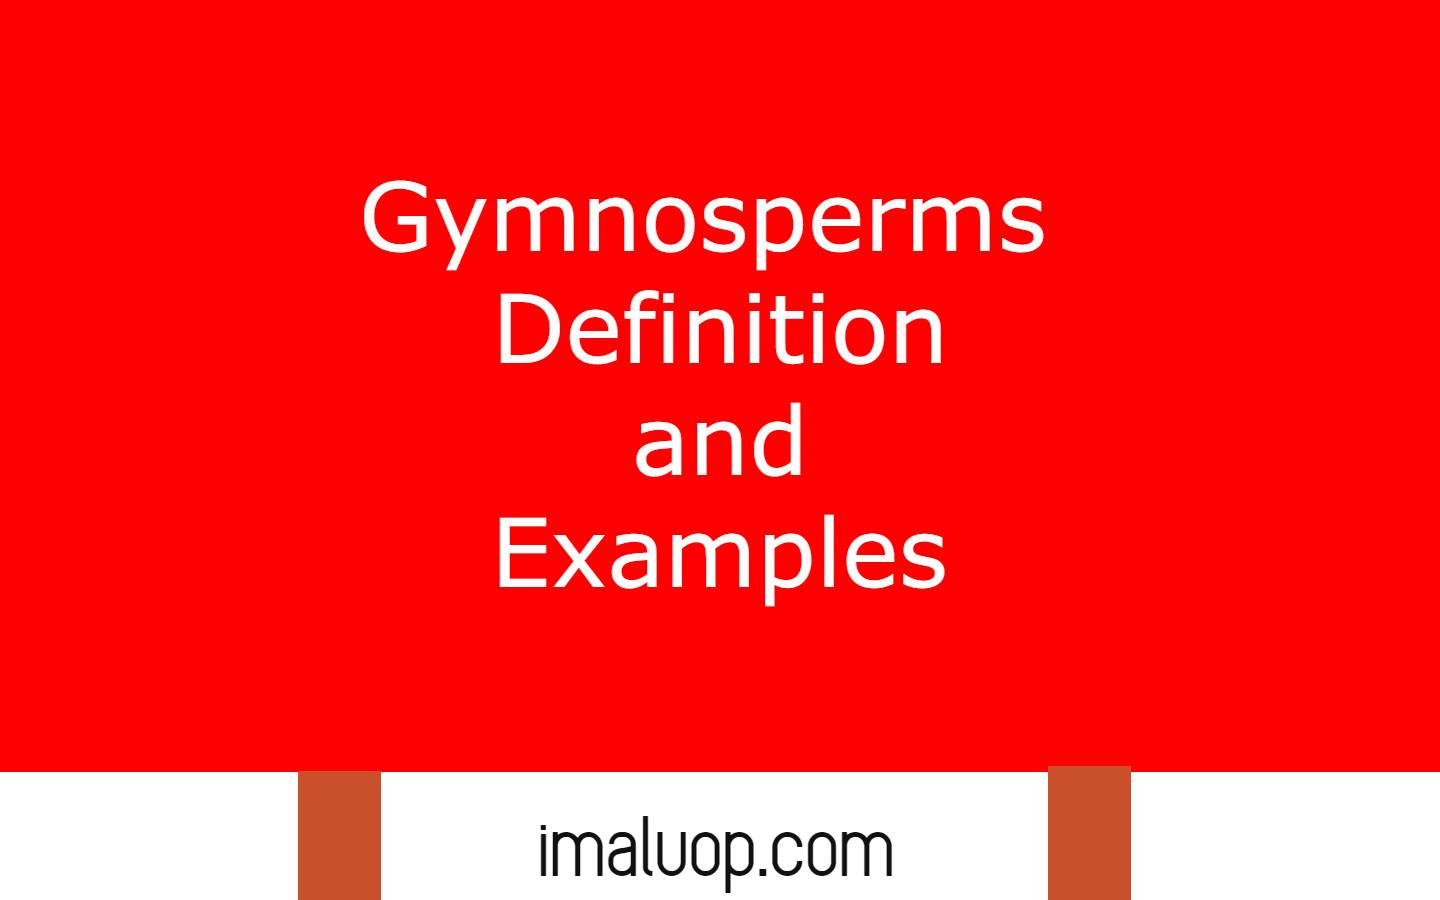 Gymnosperms Definition and Examples